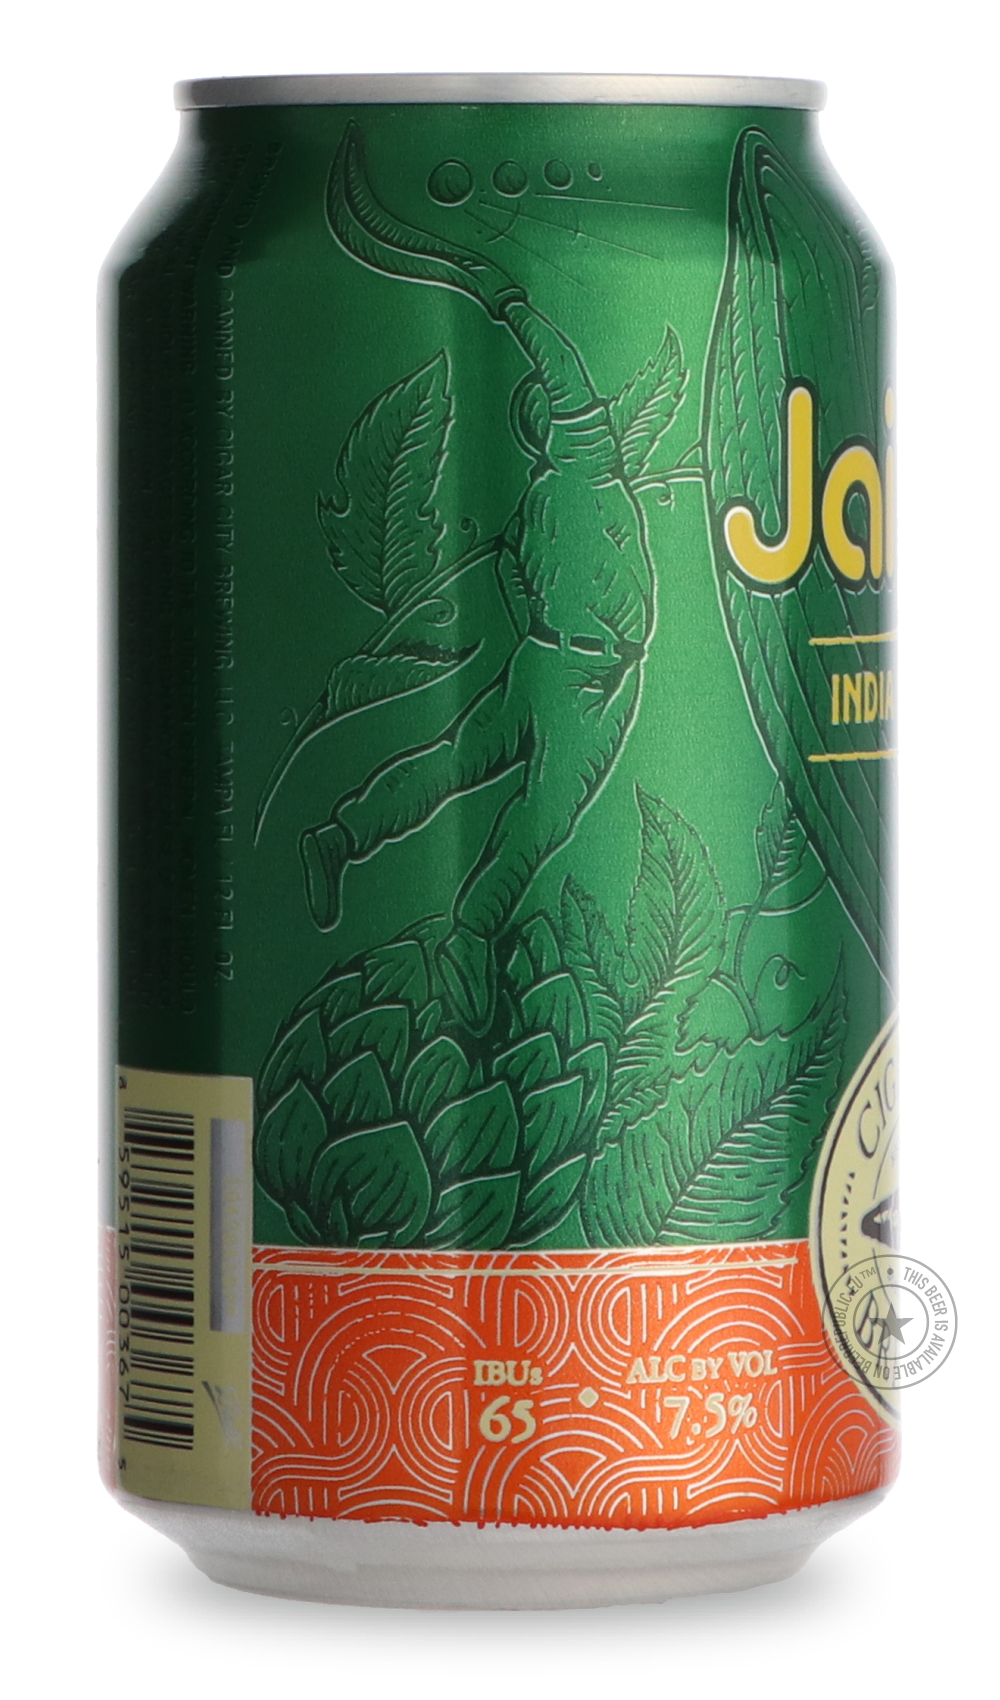 -Cigar City- Jai Alai-IPA- Only @ Beer Republic - The best online beer store for American & Canadian craft beer - Buy beer online from the USA and Canada - Bier online kopen - Amerikaans bier kopen - Craft beer store - Craft beer kopen - Amerikanisch bier kaufen - Bier online kaufen - Acheter biere online - IPA - Stout - Porter - New England IPA - Hazy IPA - Imperial Stout - Barrel Aged - Barrel Aged Imperial Stout - Brown - Dark beer - Blond - Blonde - Pilsner - Lager - Wheat - Weizen - Amber -